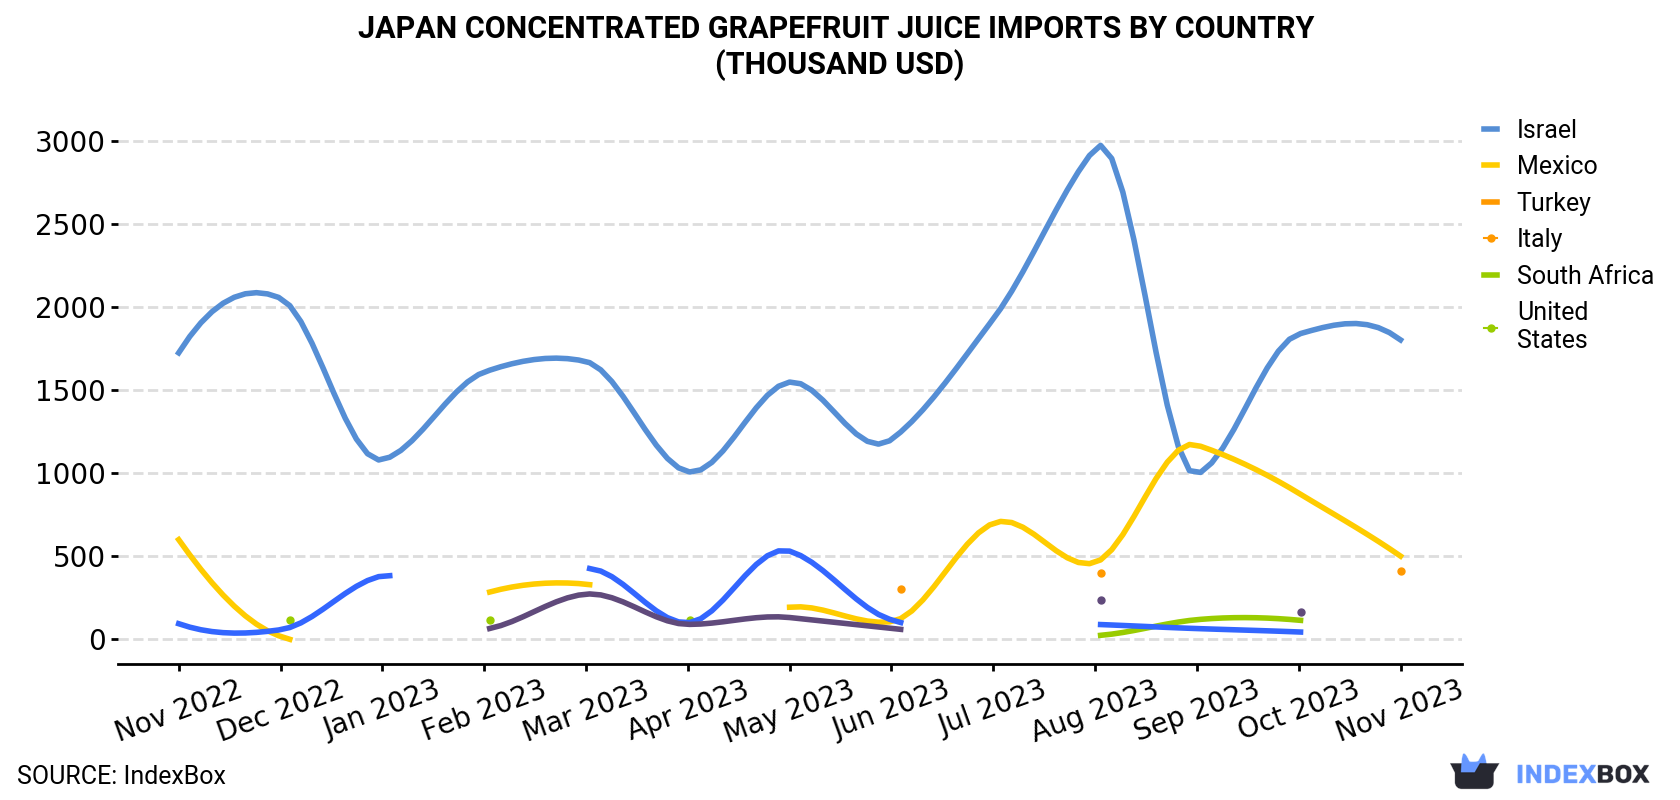 Japan Concentrated Grapefruit Juice Imports By Country (Thousand USD)